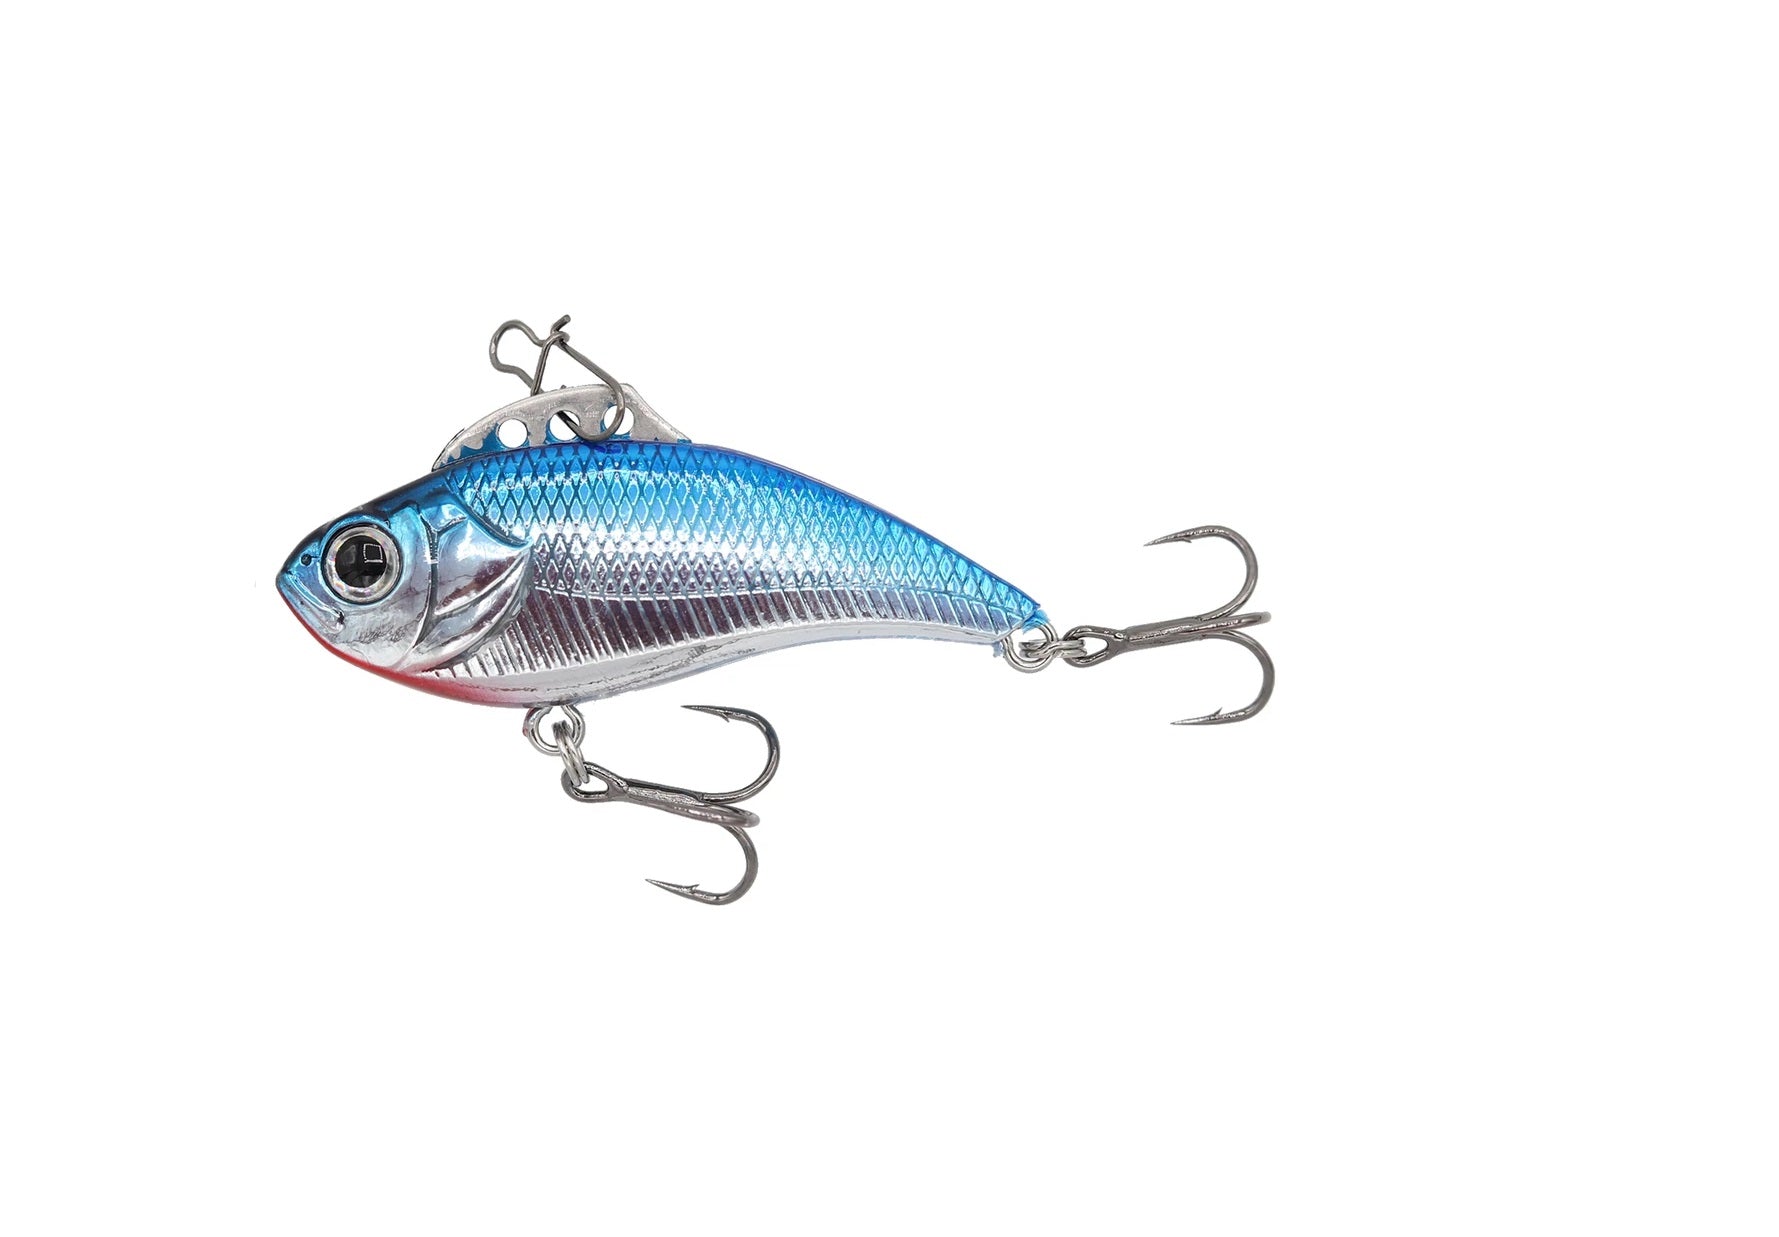 Euro-Tackle Z-Viber Rattle Baits 5/8oz 2.75 Streamside (Only available in Canada)